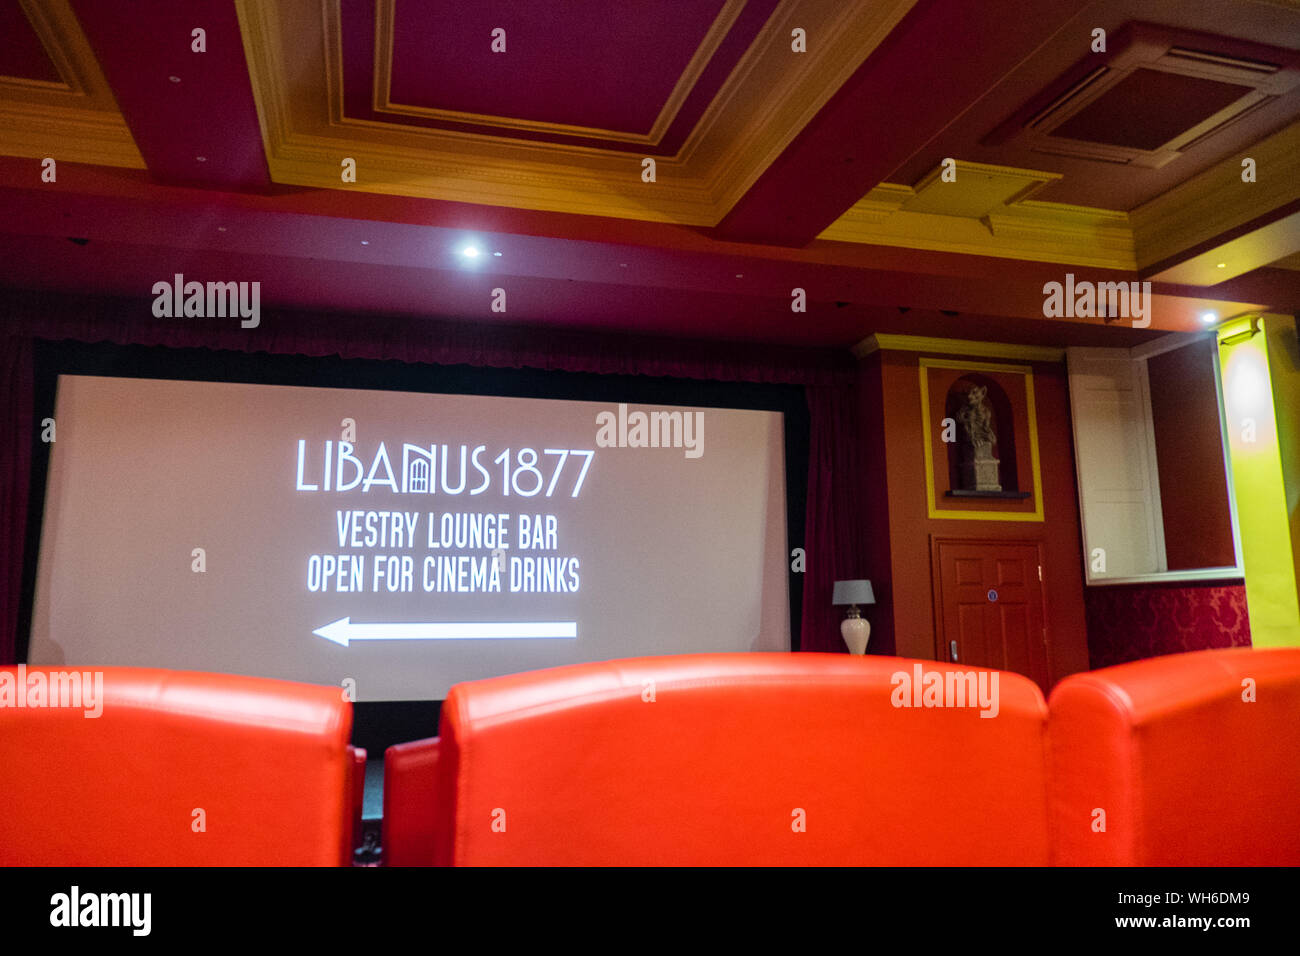 Libanus 1877,boutique,cinema,with,red,leather,seats,armchairs,with,cushions and blankets.Small,renovated,chapel,in,seaside,village,of,Borth,Wales,UK Stock Photo